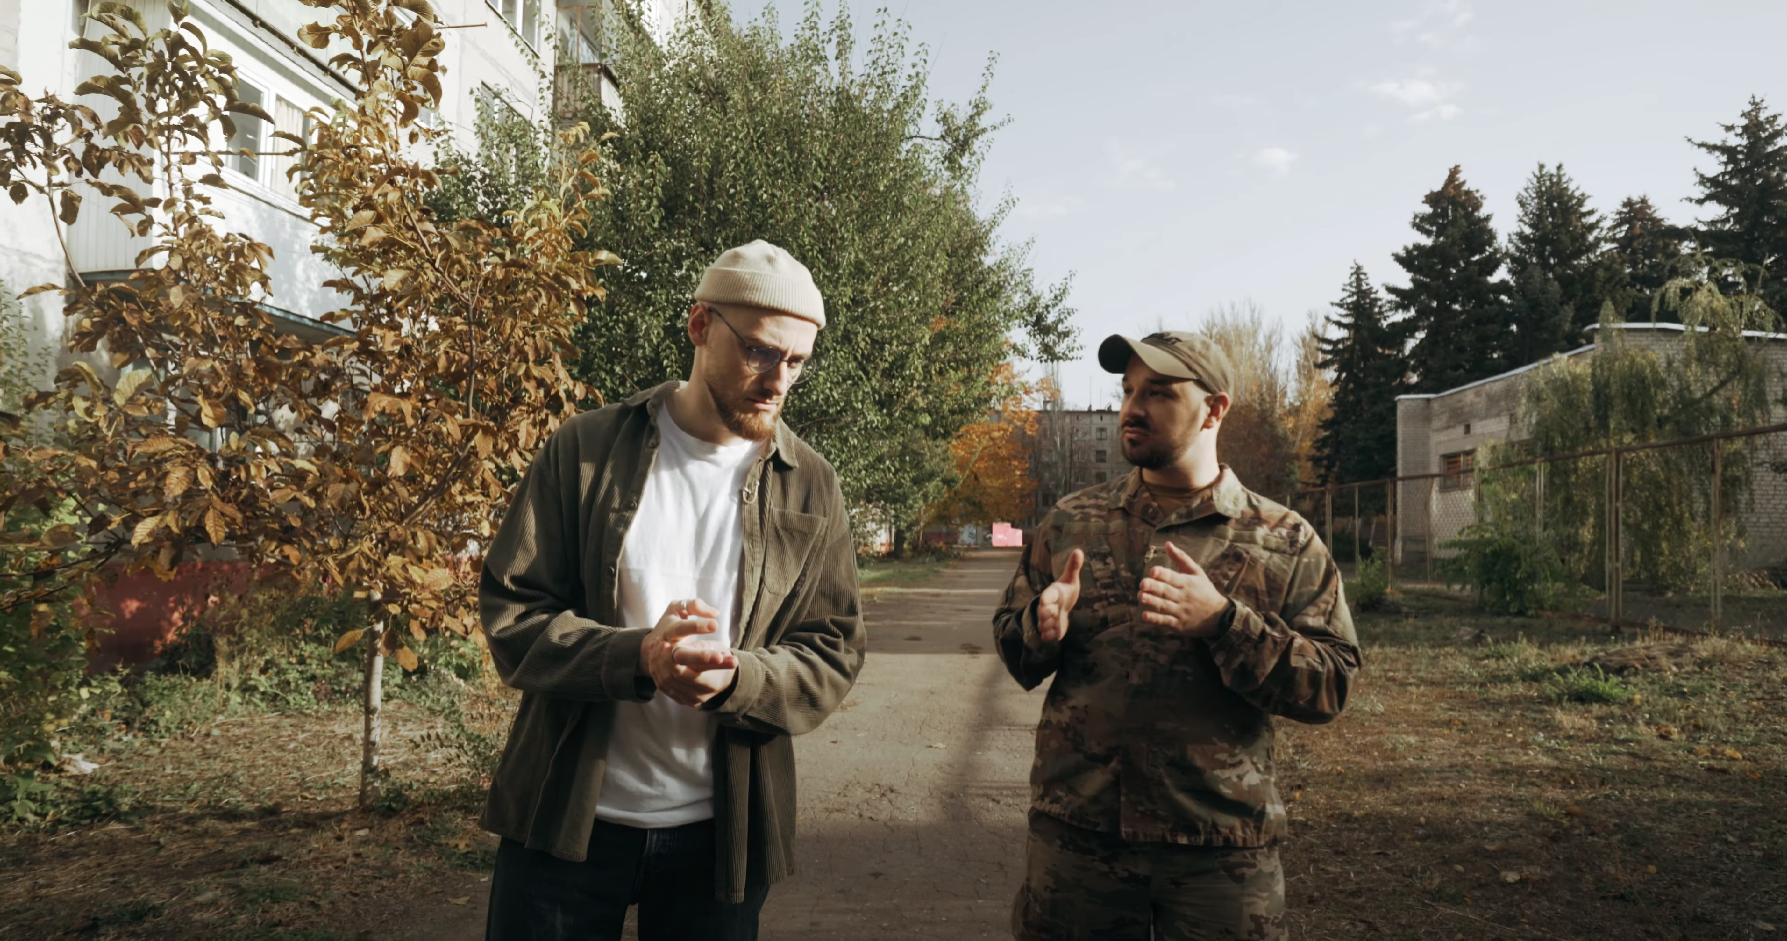 For the tenth and final episode of How Are You There?, TWR Ukraine took a risk by traveling farther east to interview Christians in war-torn cities.